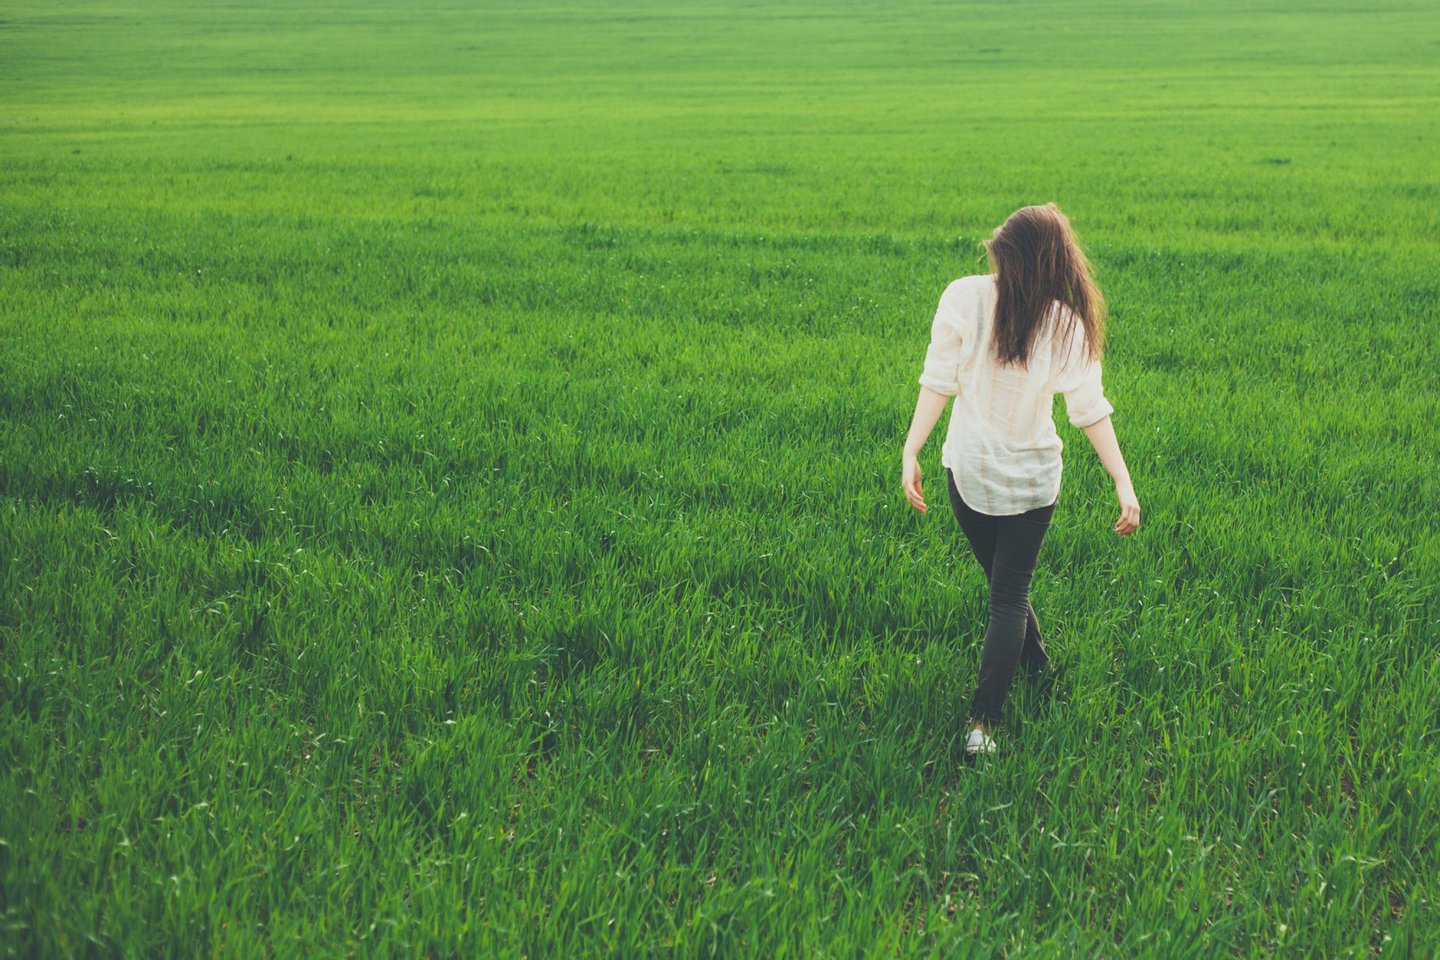 Girls, Teenage Girls, Women, Females, Copy Space, Grass, Jeans, Young Adult, Looking, Walking, Caucasian Ethnicity, One Person, Loneliness, Green Color, Denim, Behind, Environment, Nature, Lifestyles, Outdoors, Rear View, Brown Hair, People, Day, Summer, Springtime, Field, Meadow, 